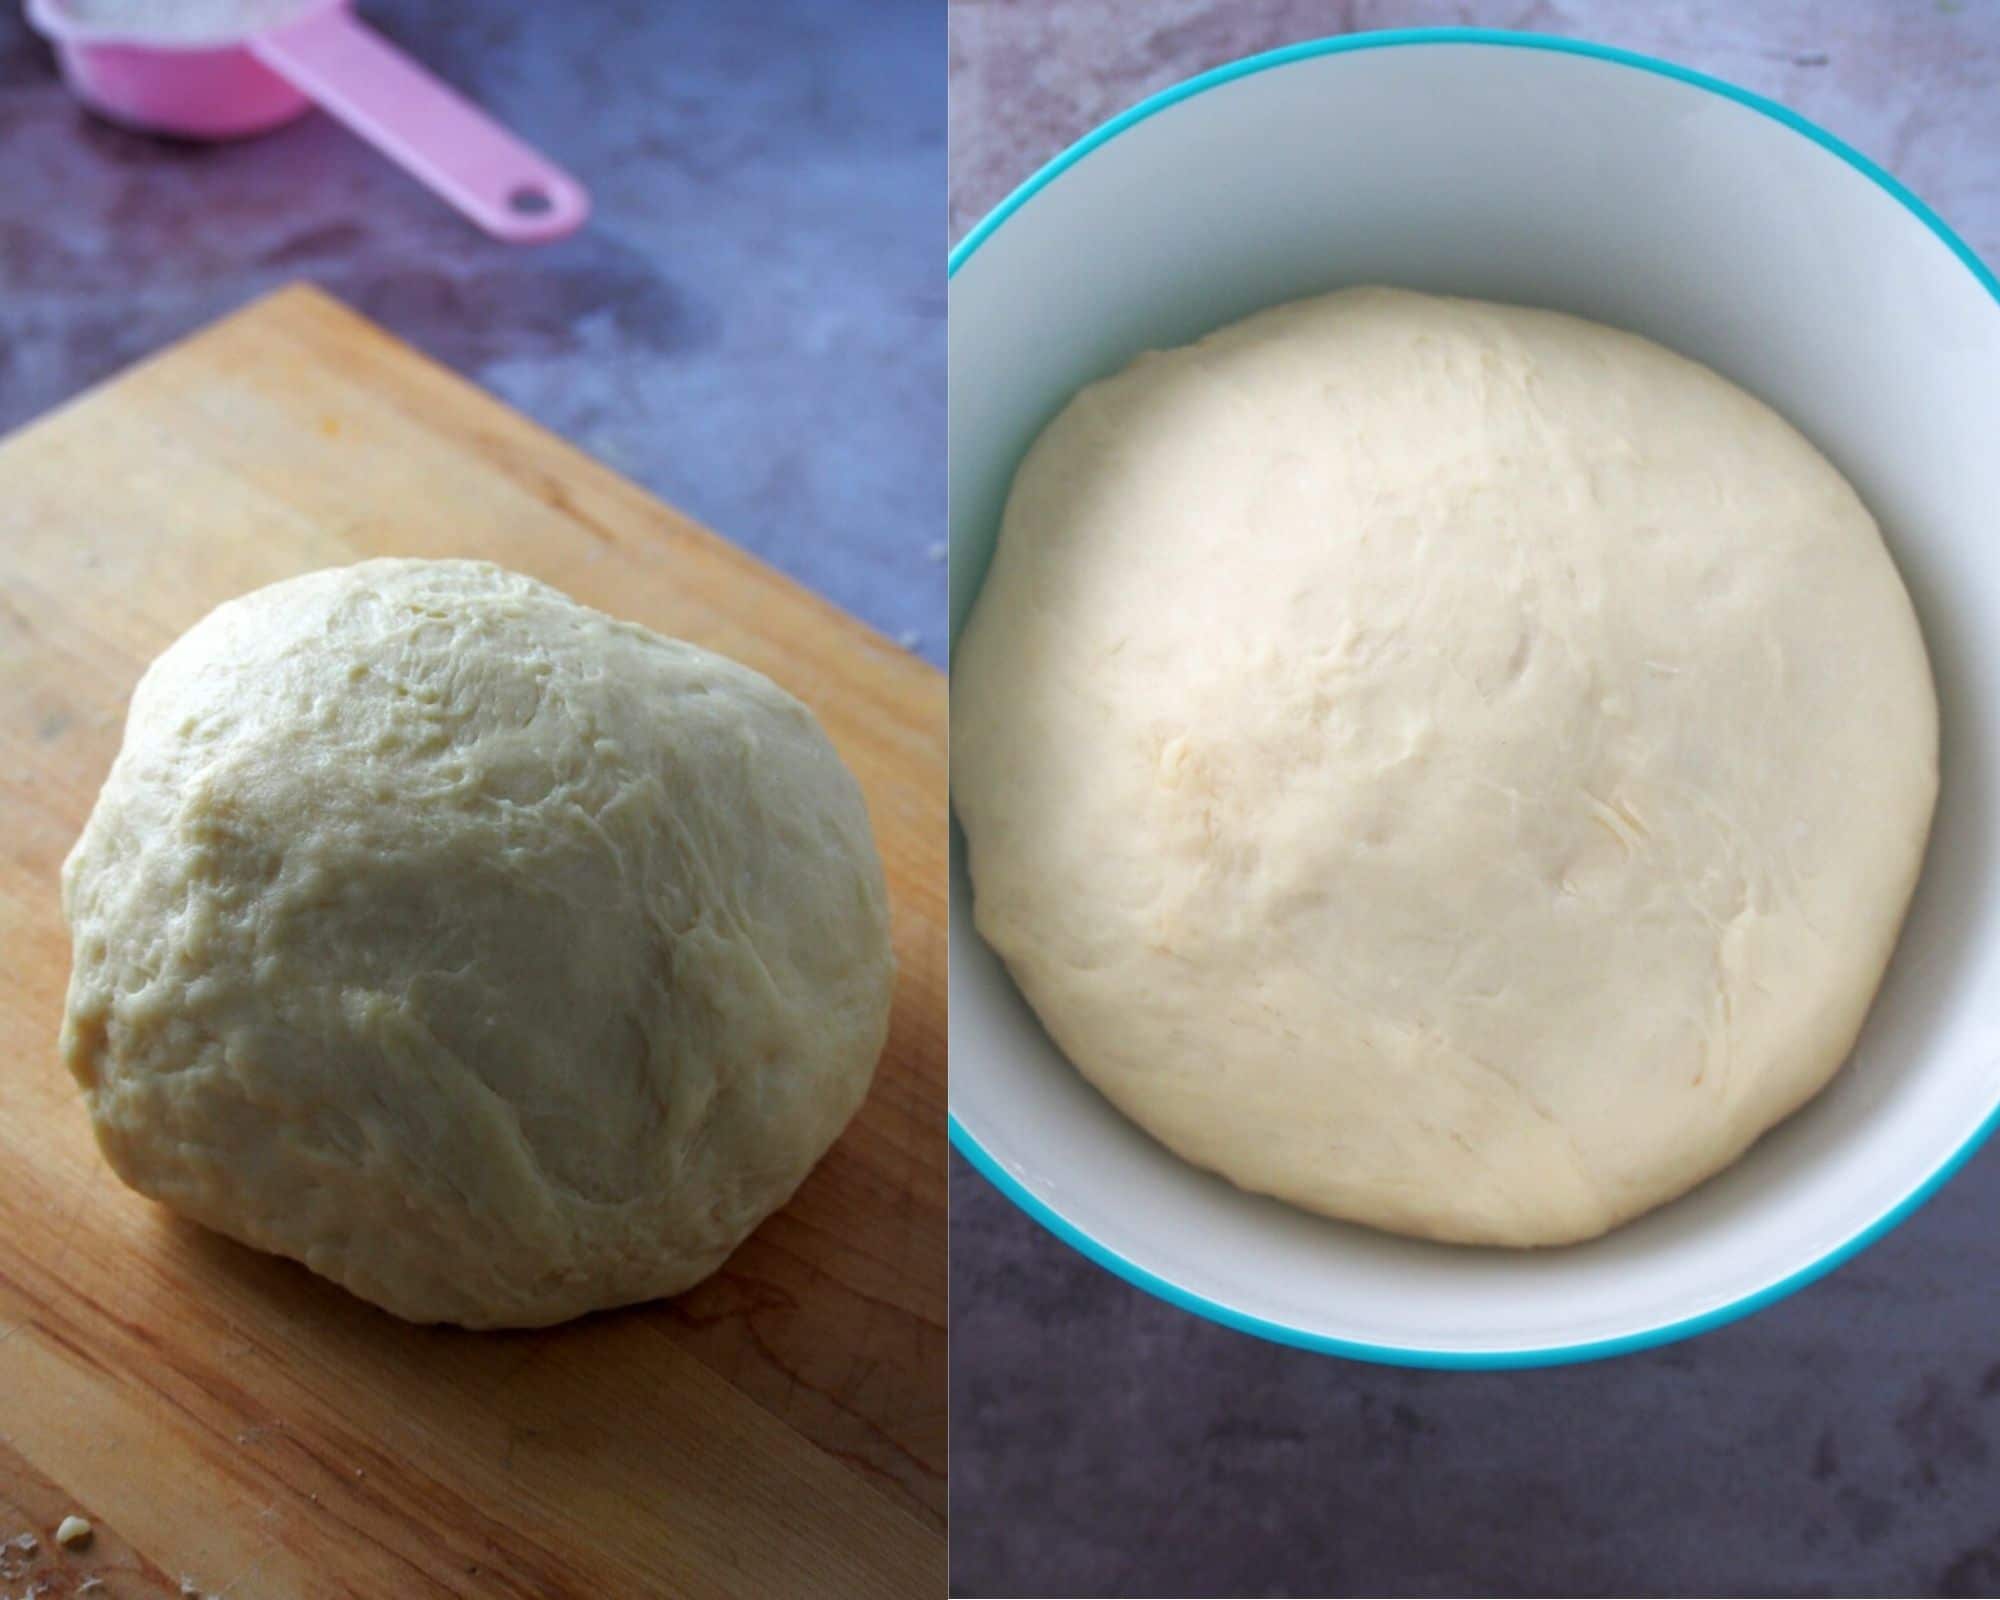 The coconut buns before and after the second rise.